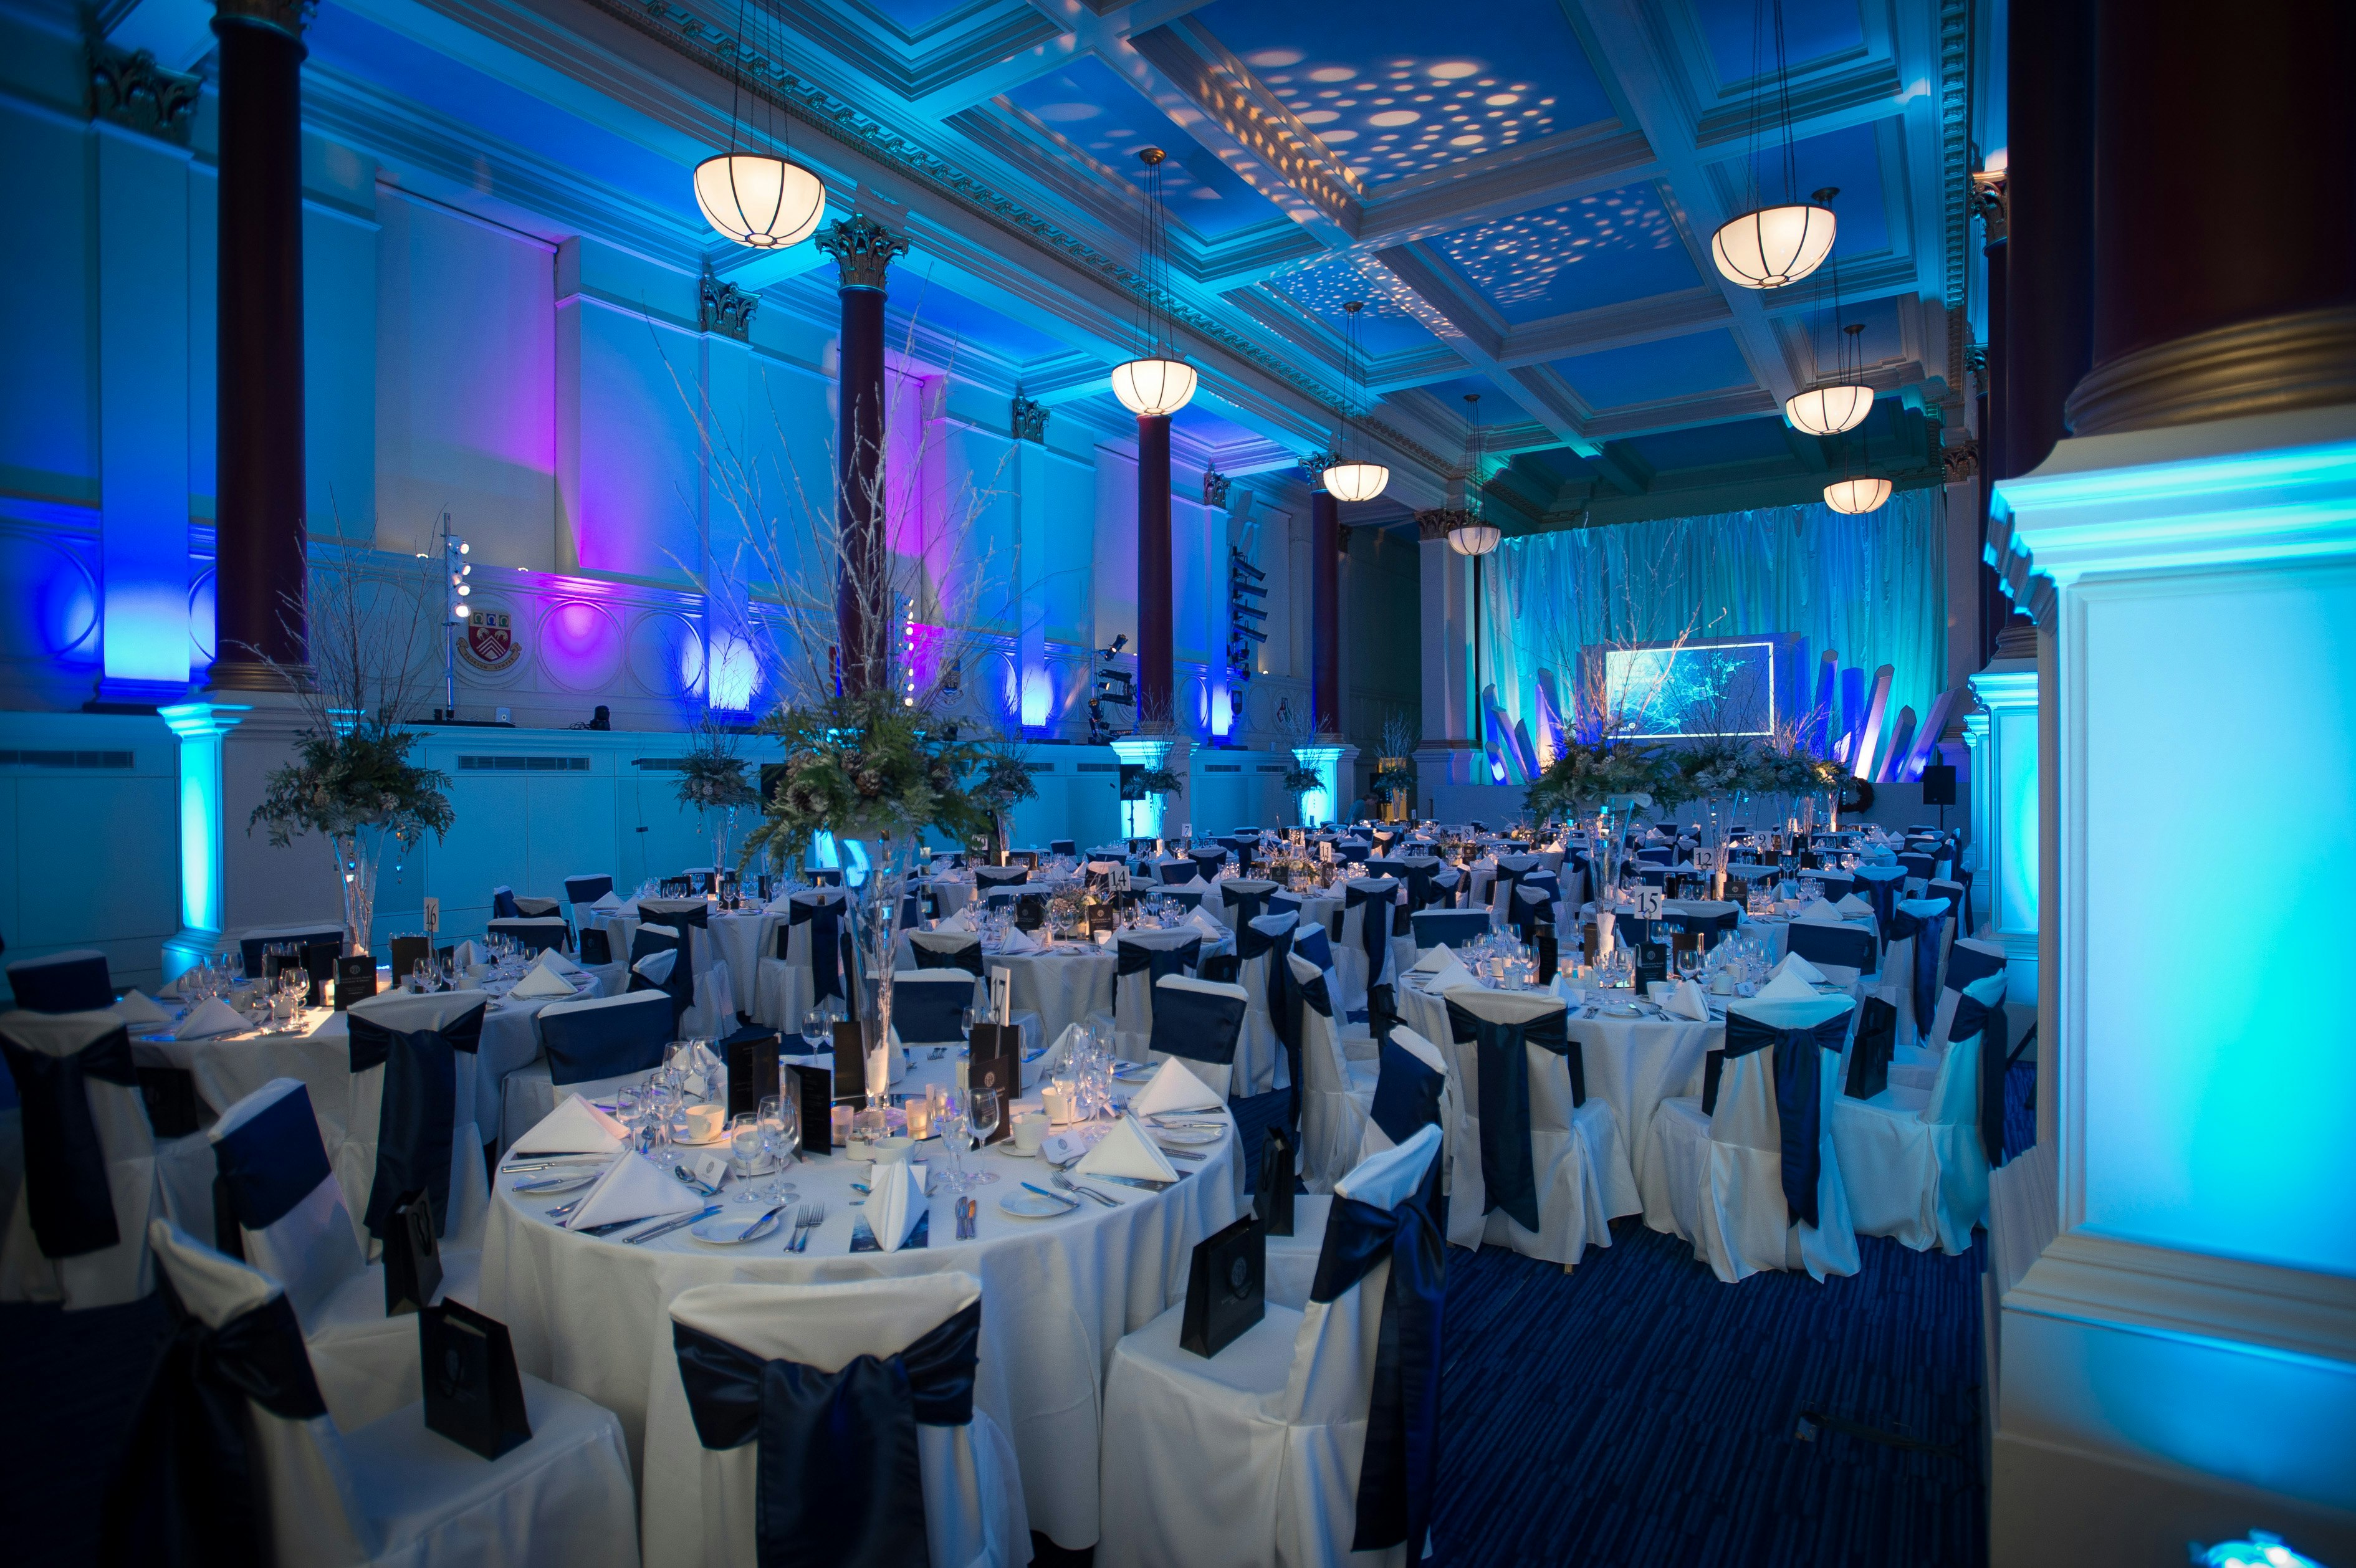 Awards Ceremony Venues in London - BMA House